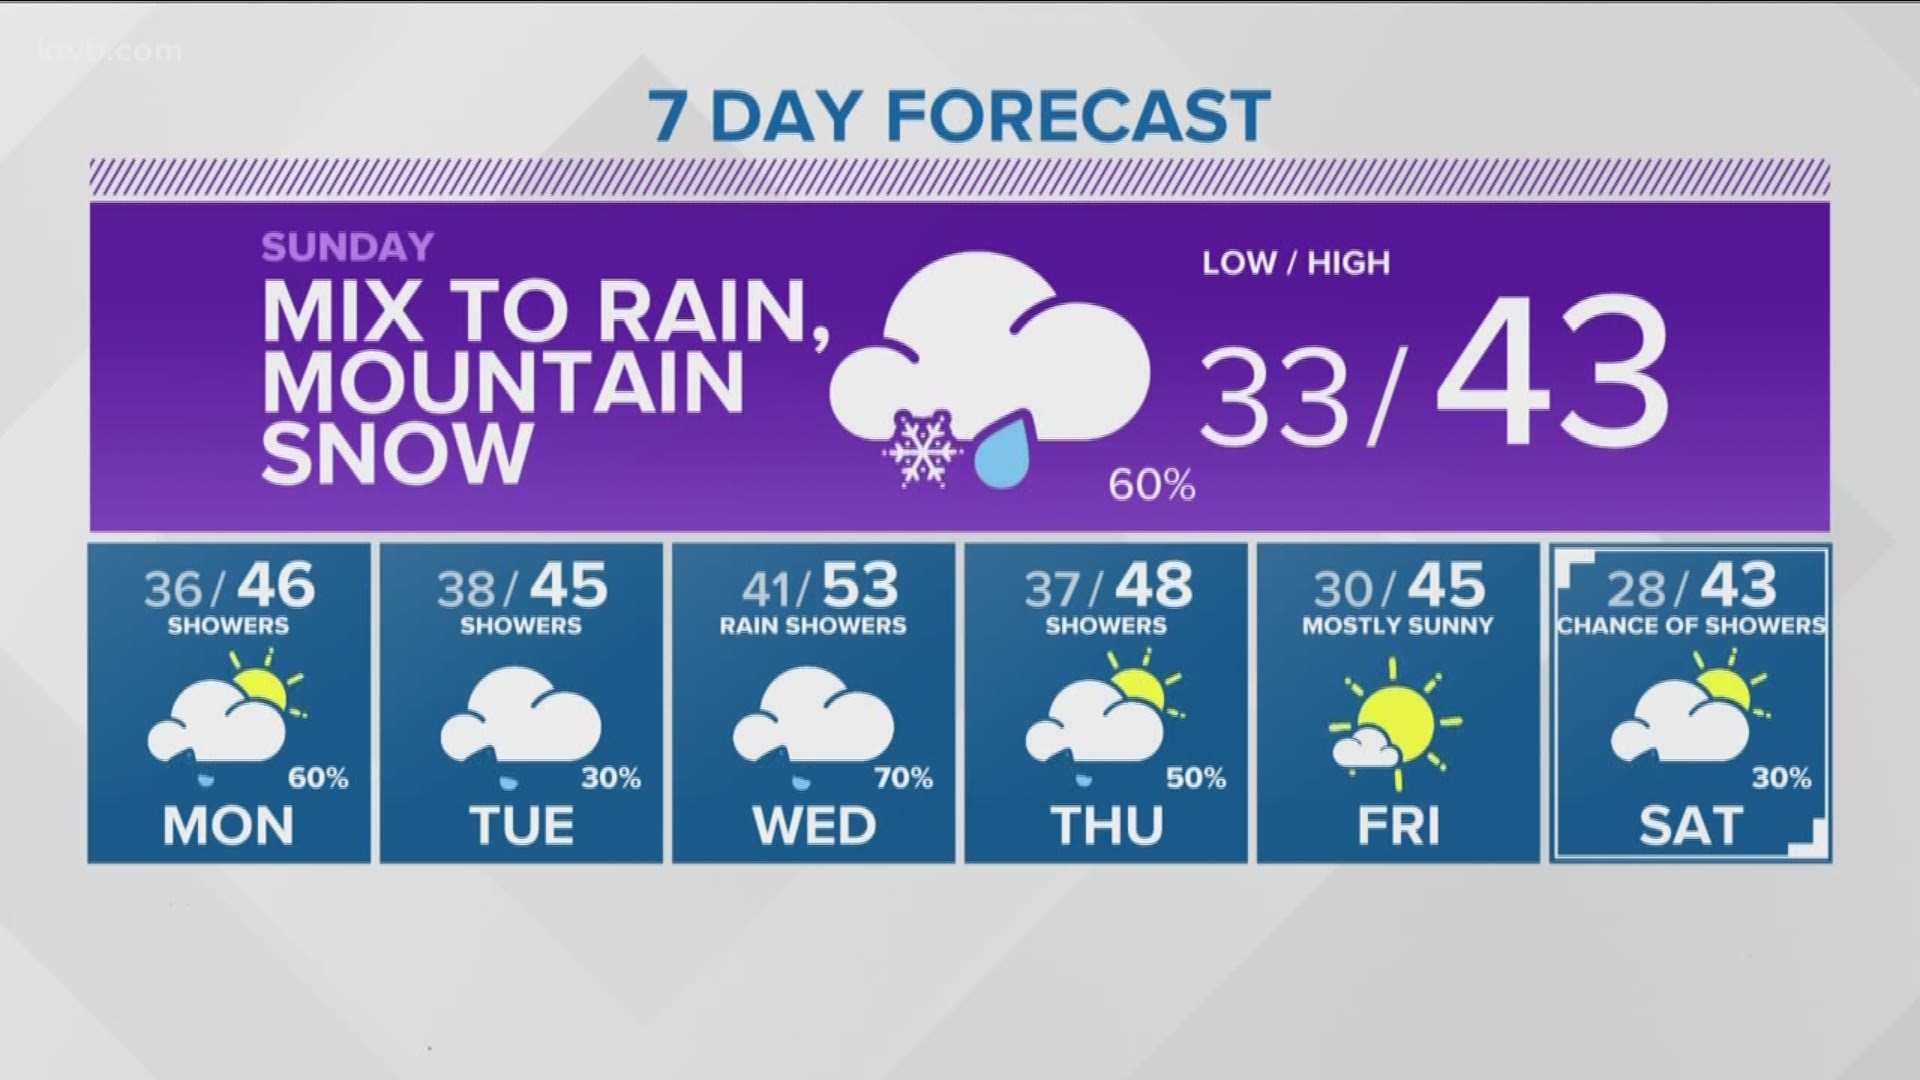 Forecast: Snow through the weekend; heavy snow mountains, mixing with rain valleys